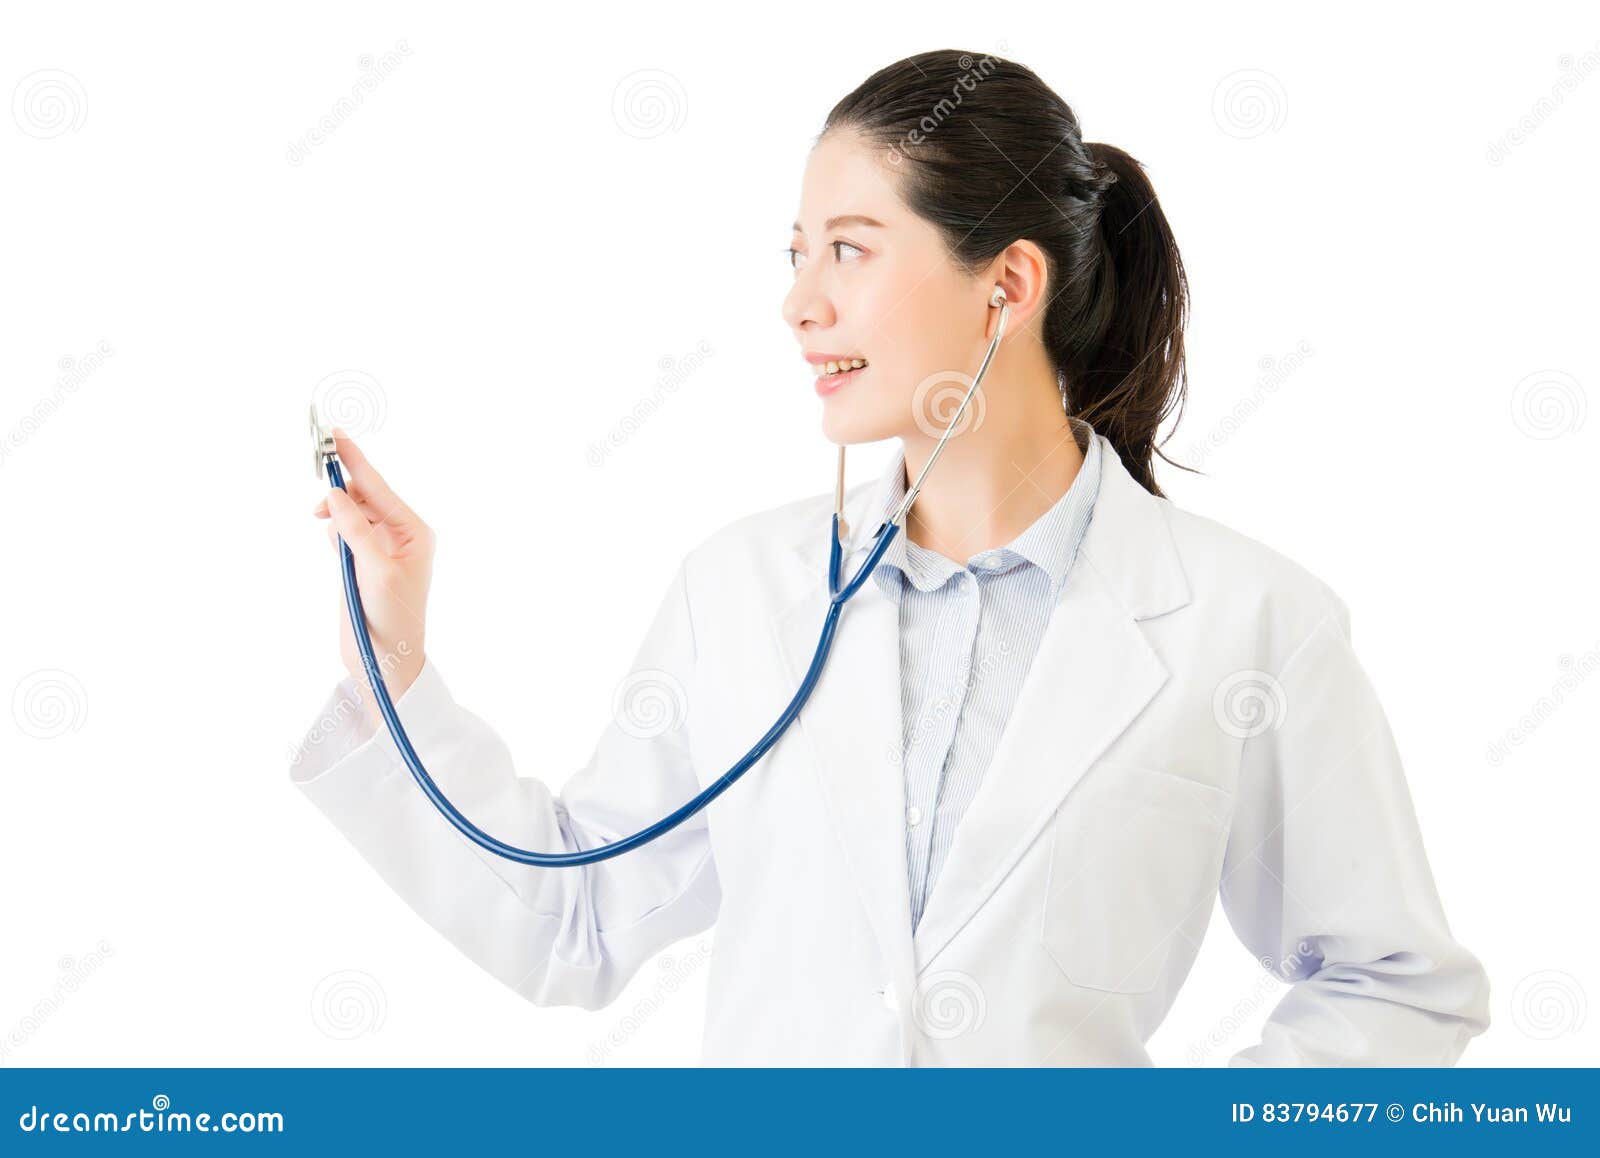 successful asian woman doctor use stethoscope to auscultation